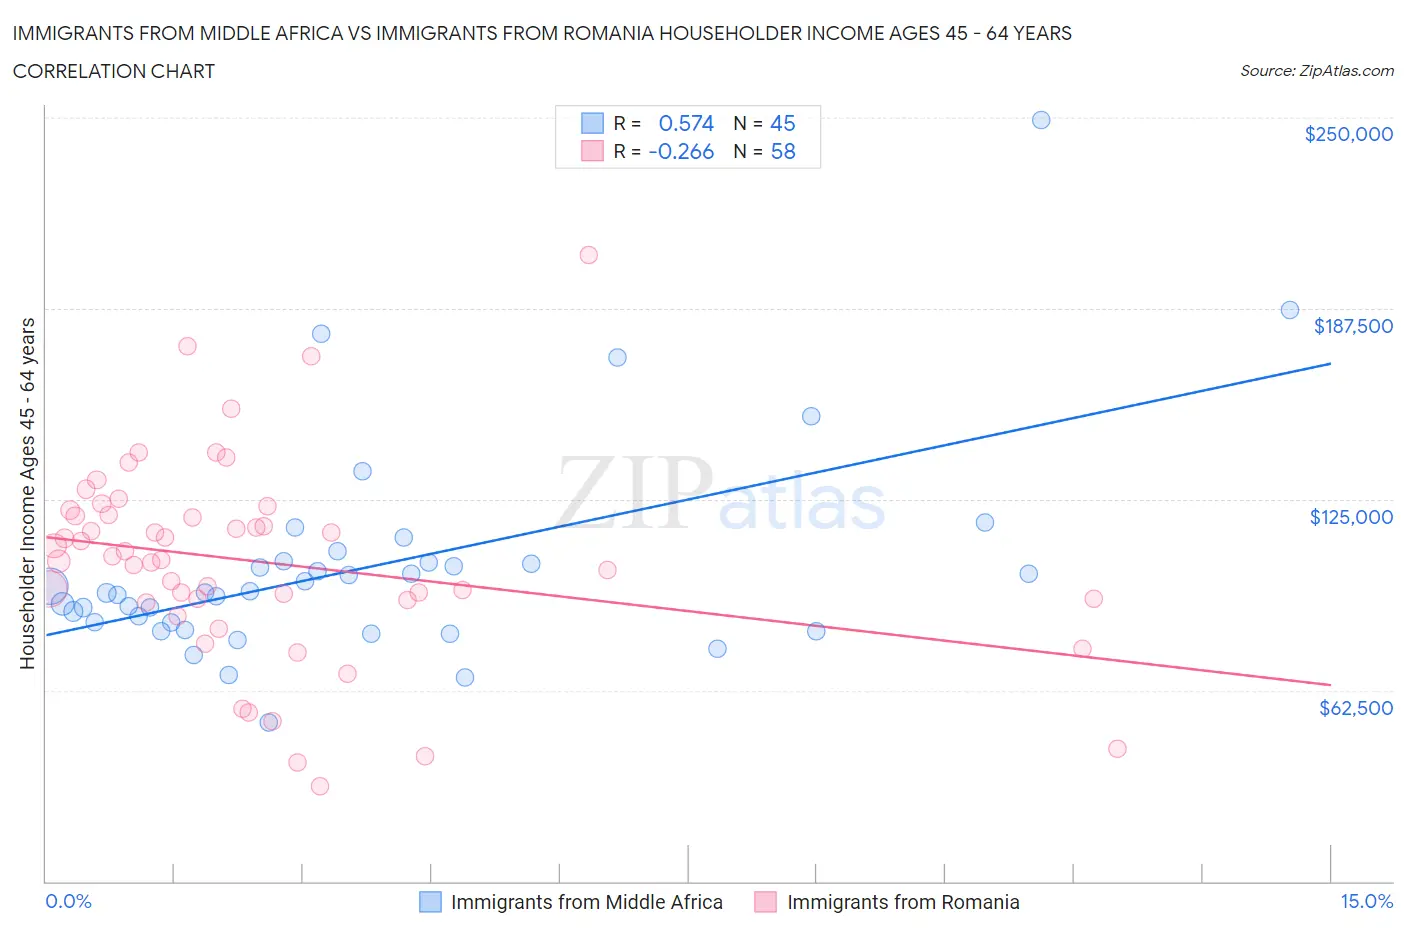 Immigrants from Middle Africa vs Immigrants from Romania Householder Income Ages 45 - 64 years